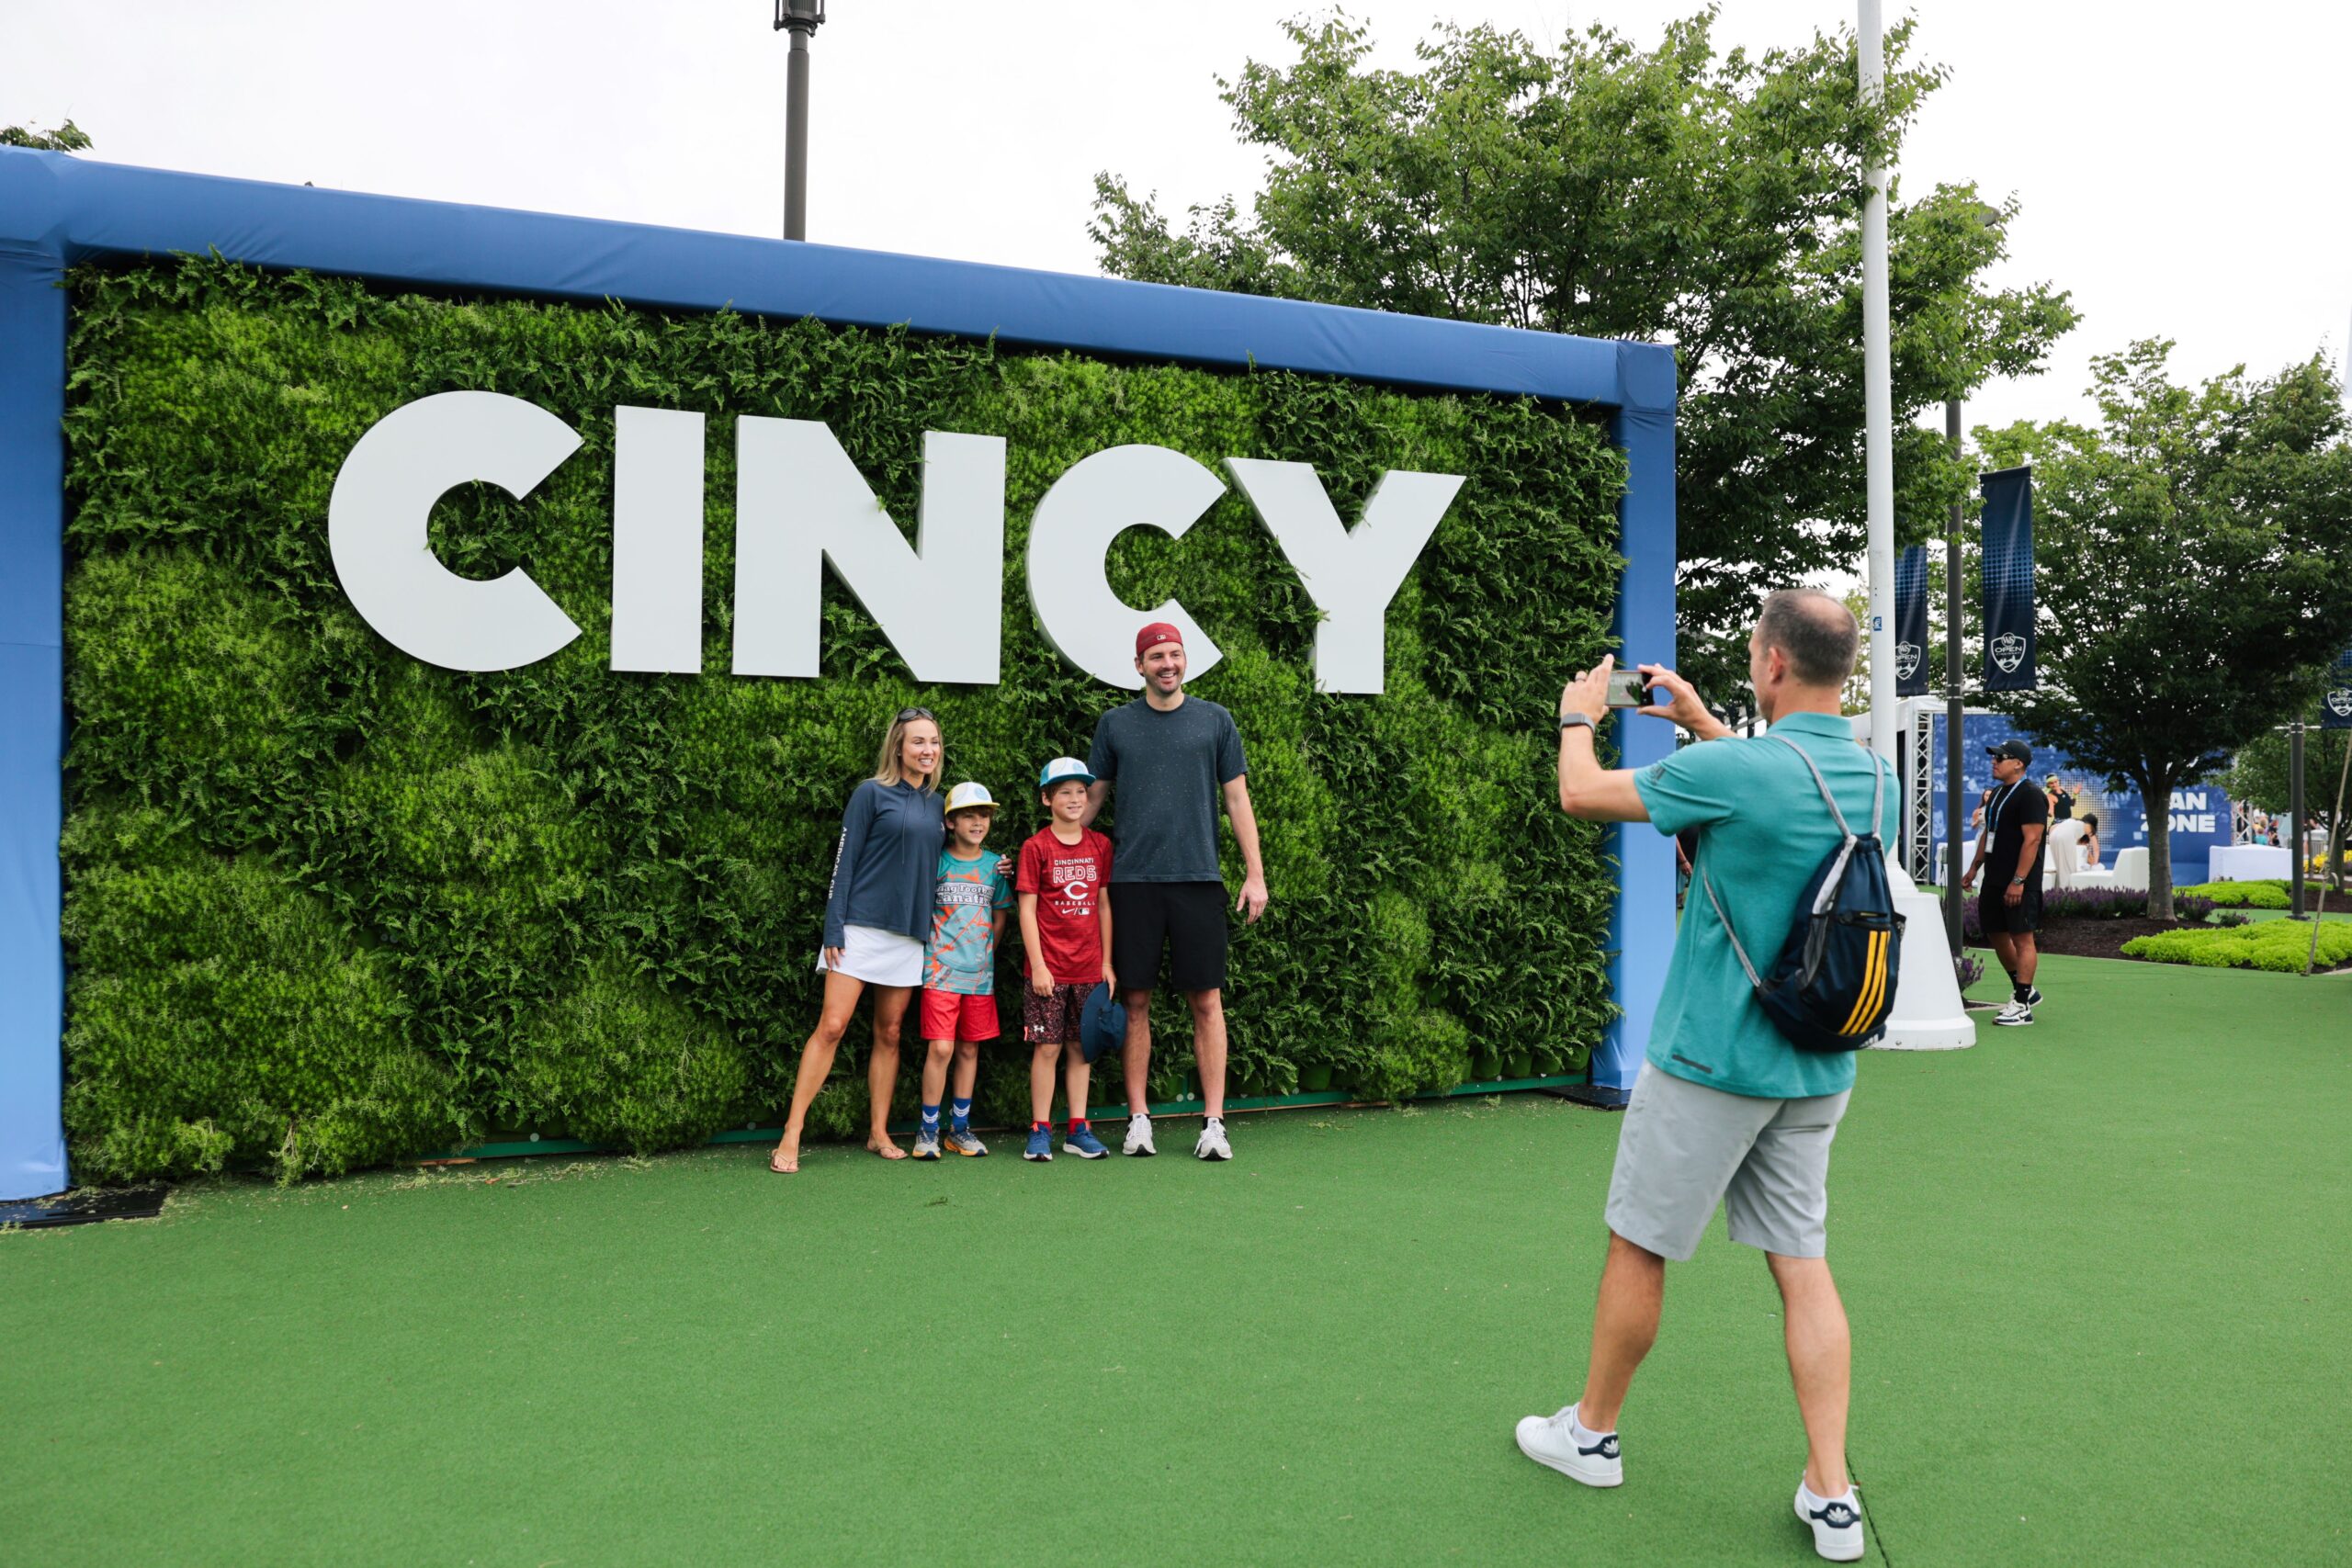 Family posing in front of a "Cincy" photo op